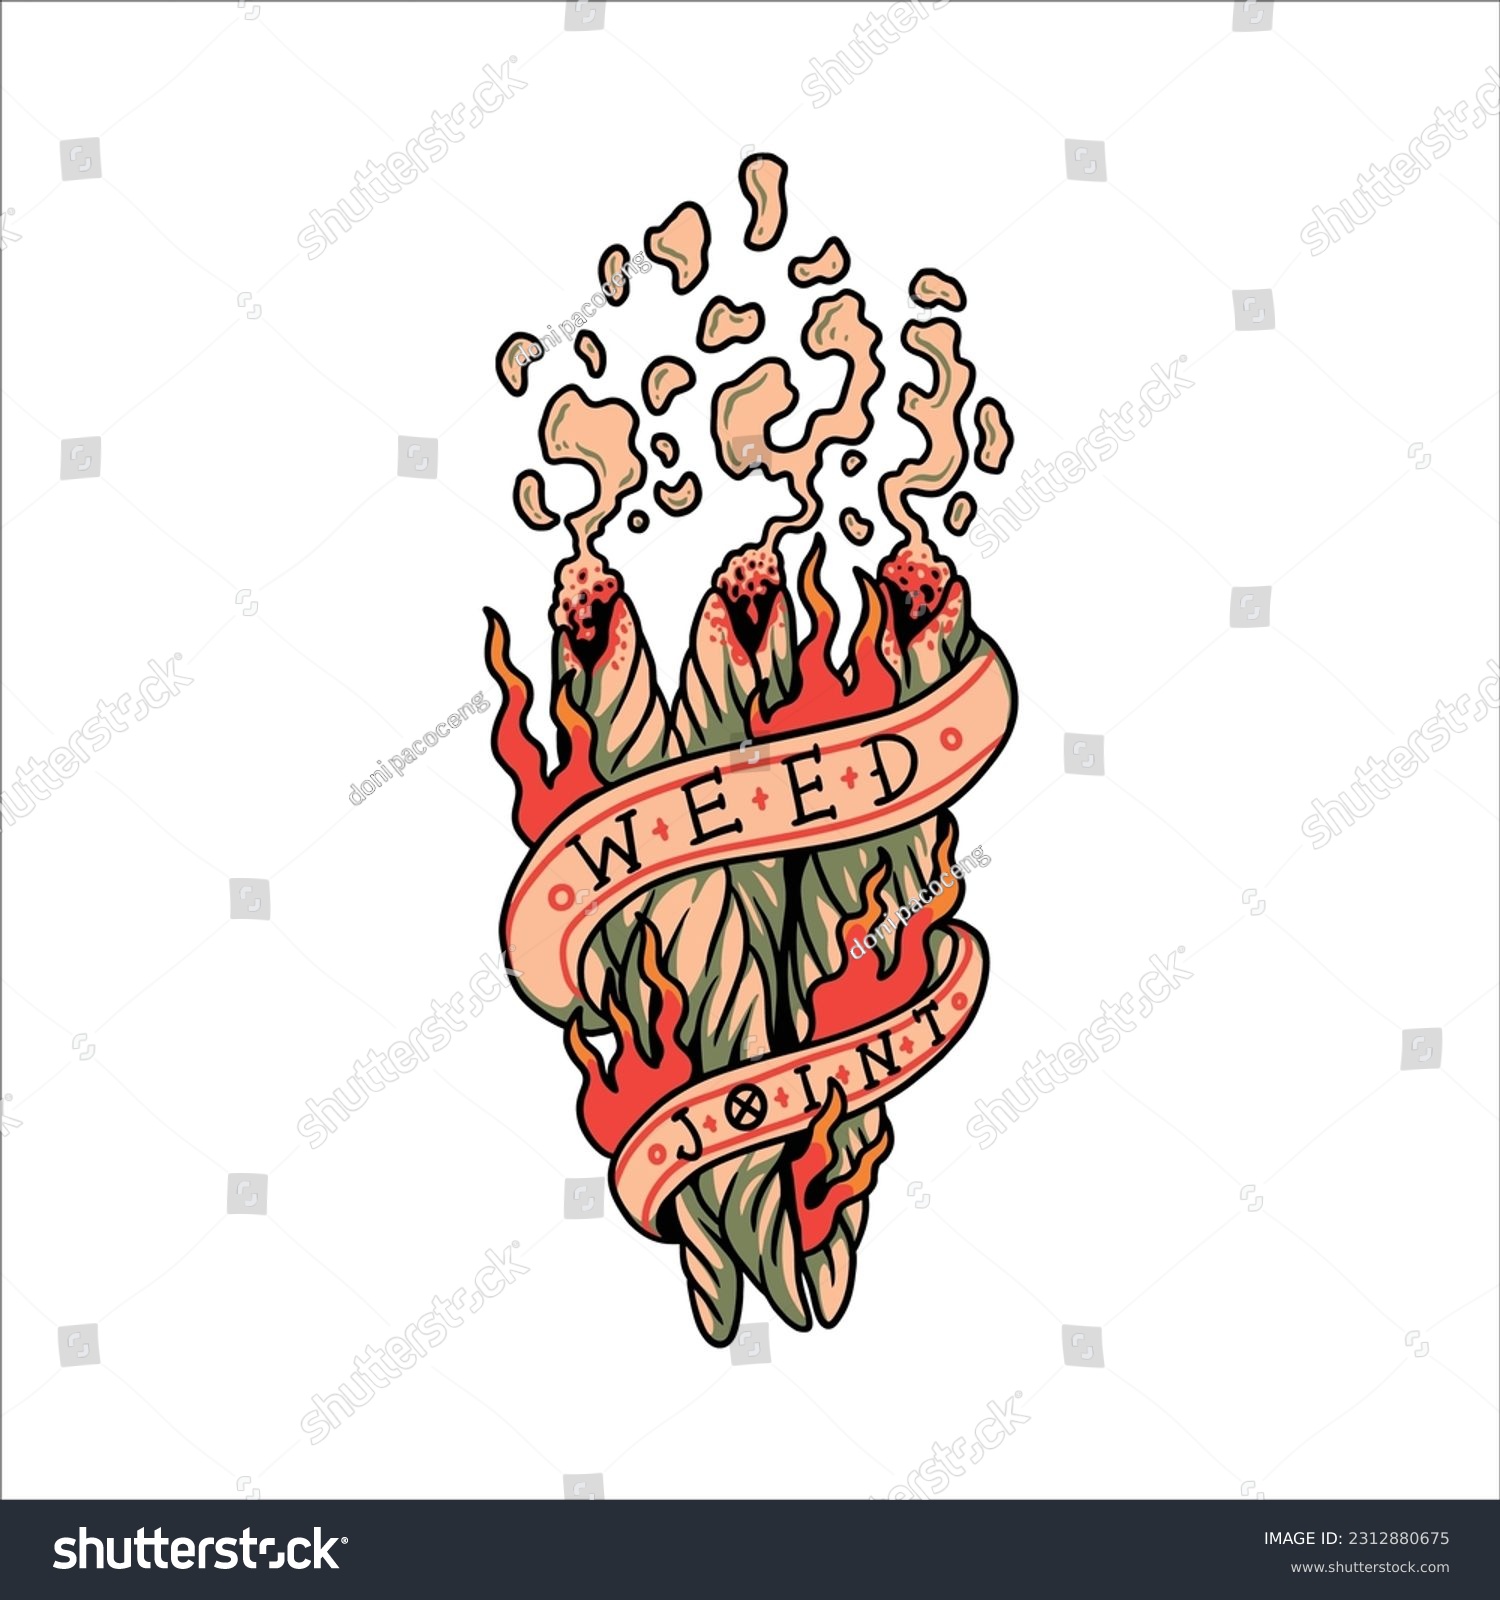 SVG of smoke weed tattoo vector design  svg